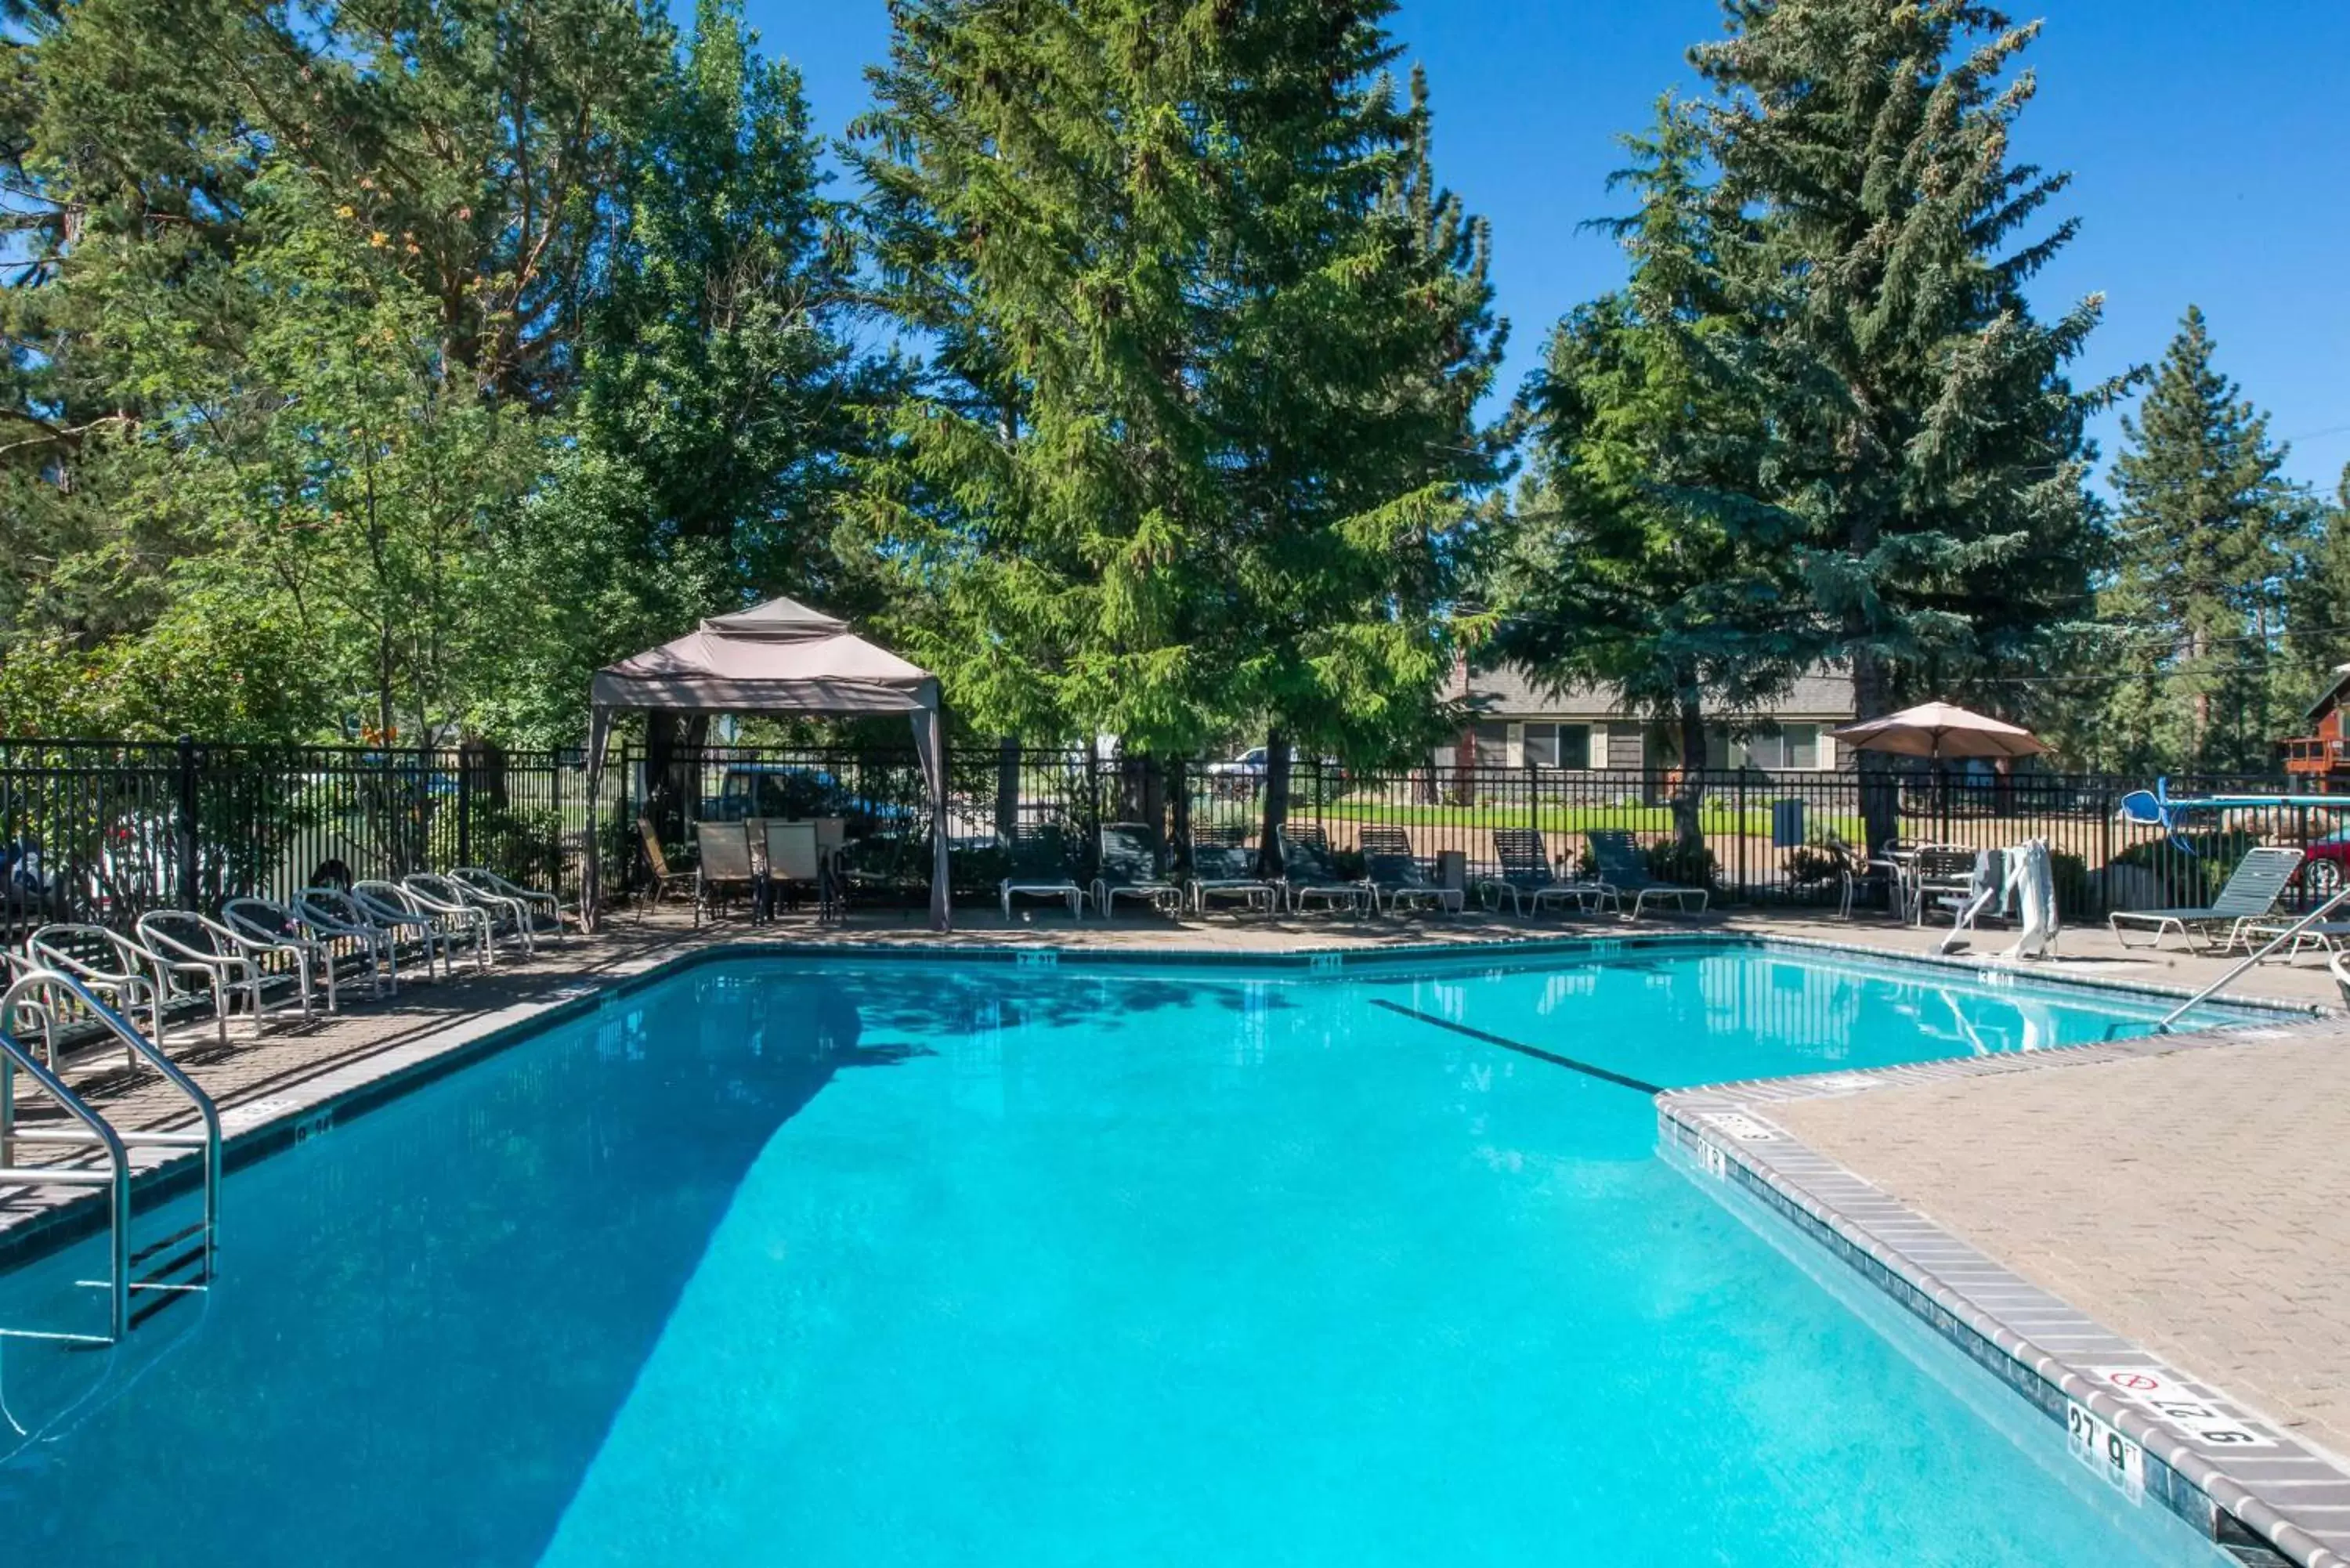 On site, Swimming Pool in Station House Inn South Lake Tahoe, by Oliver